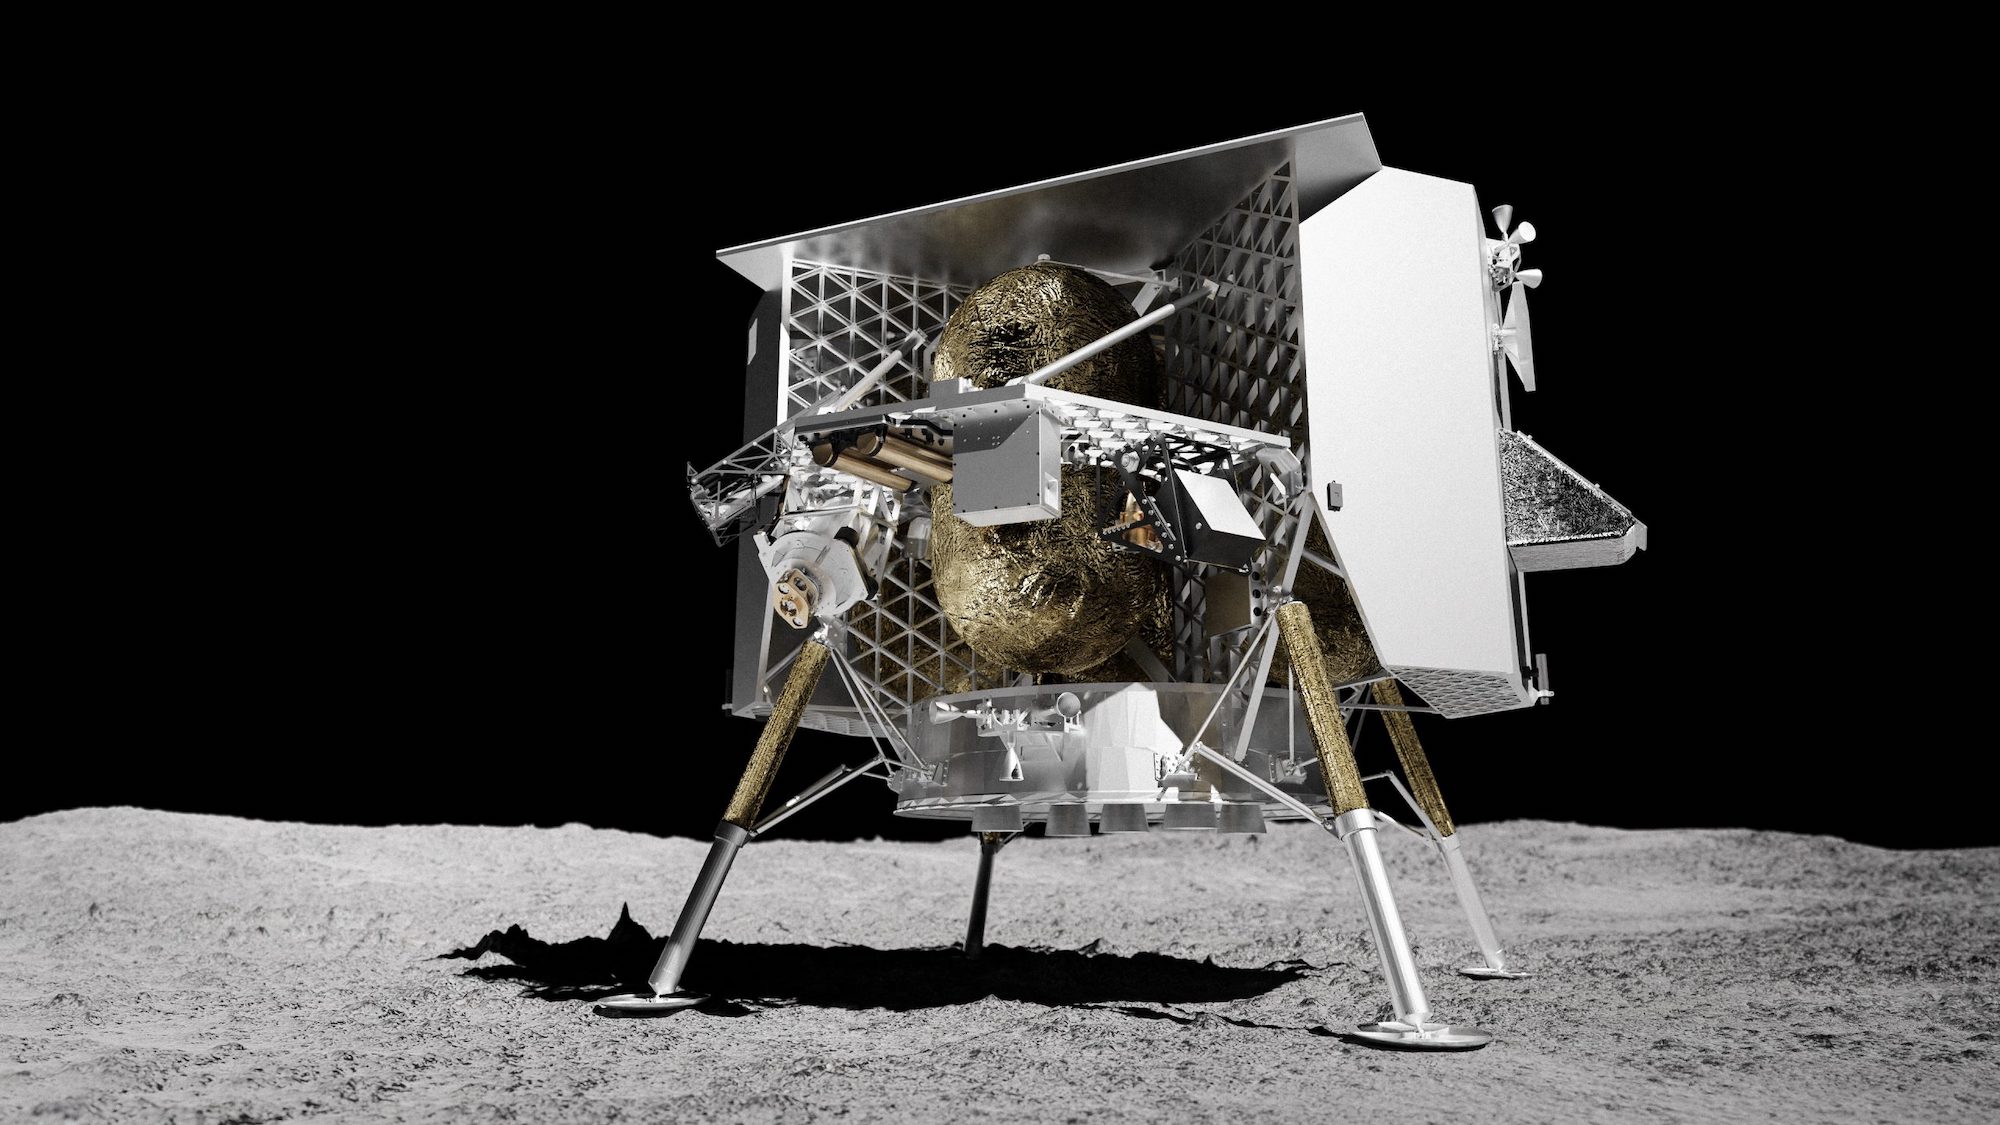 NASA is headed for the moon next week, and it’s bringing lots of weird stuff